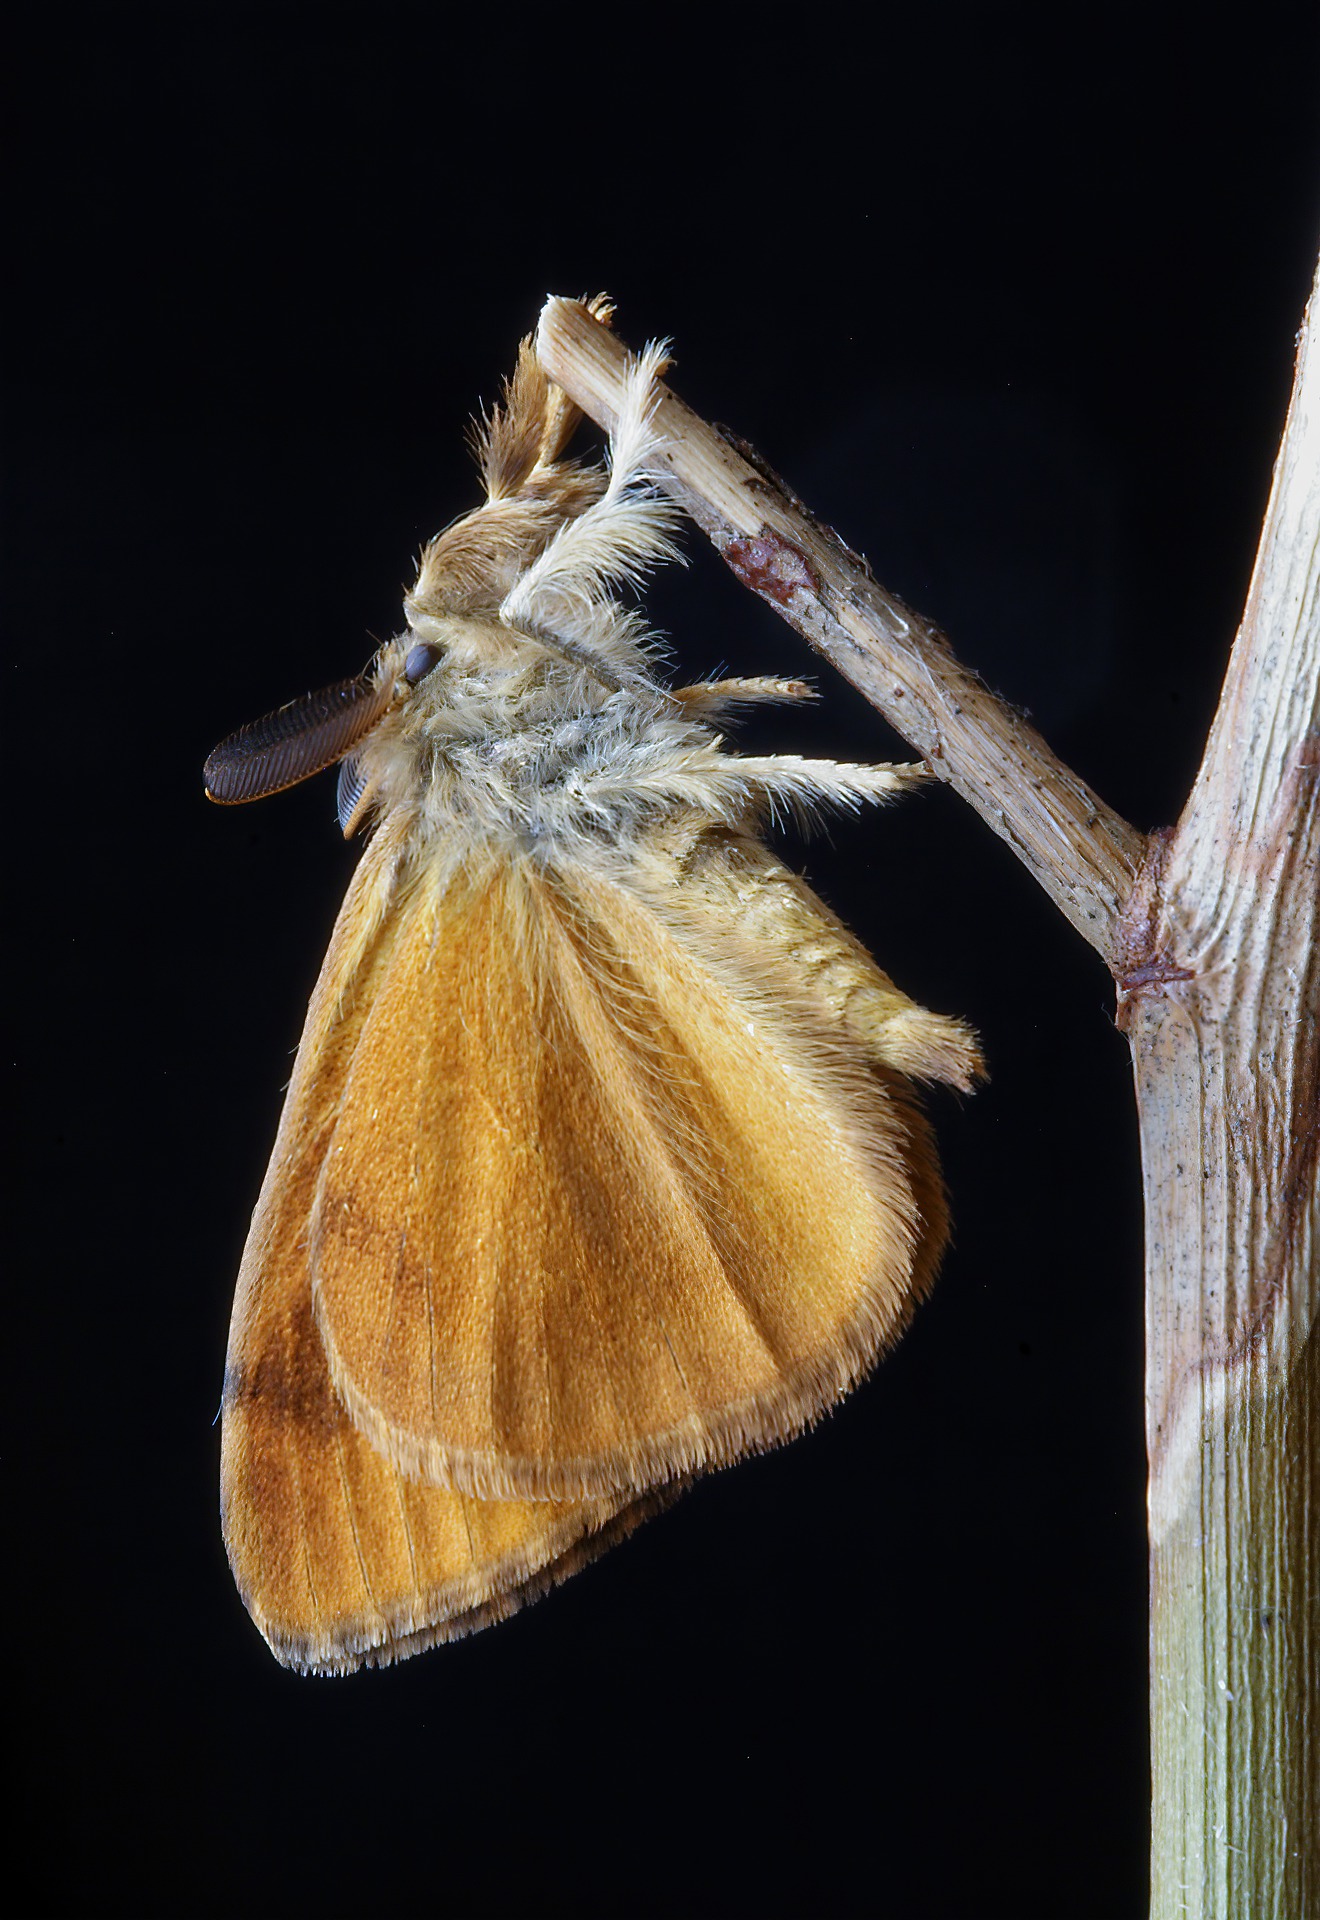 A moth hanging from a twig.